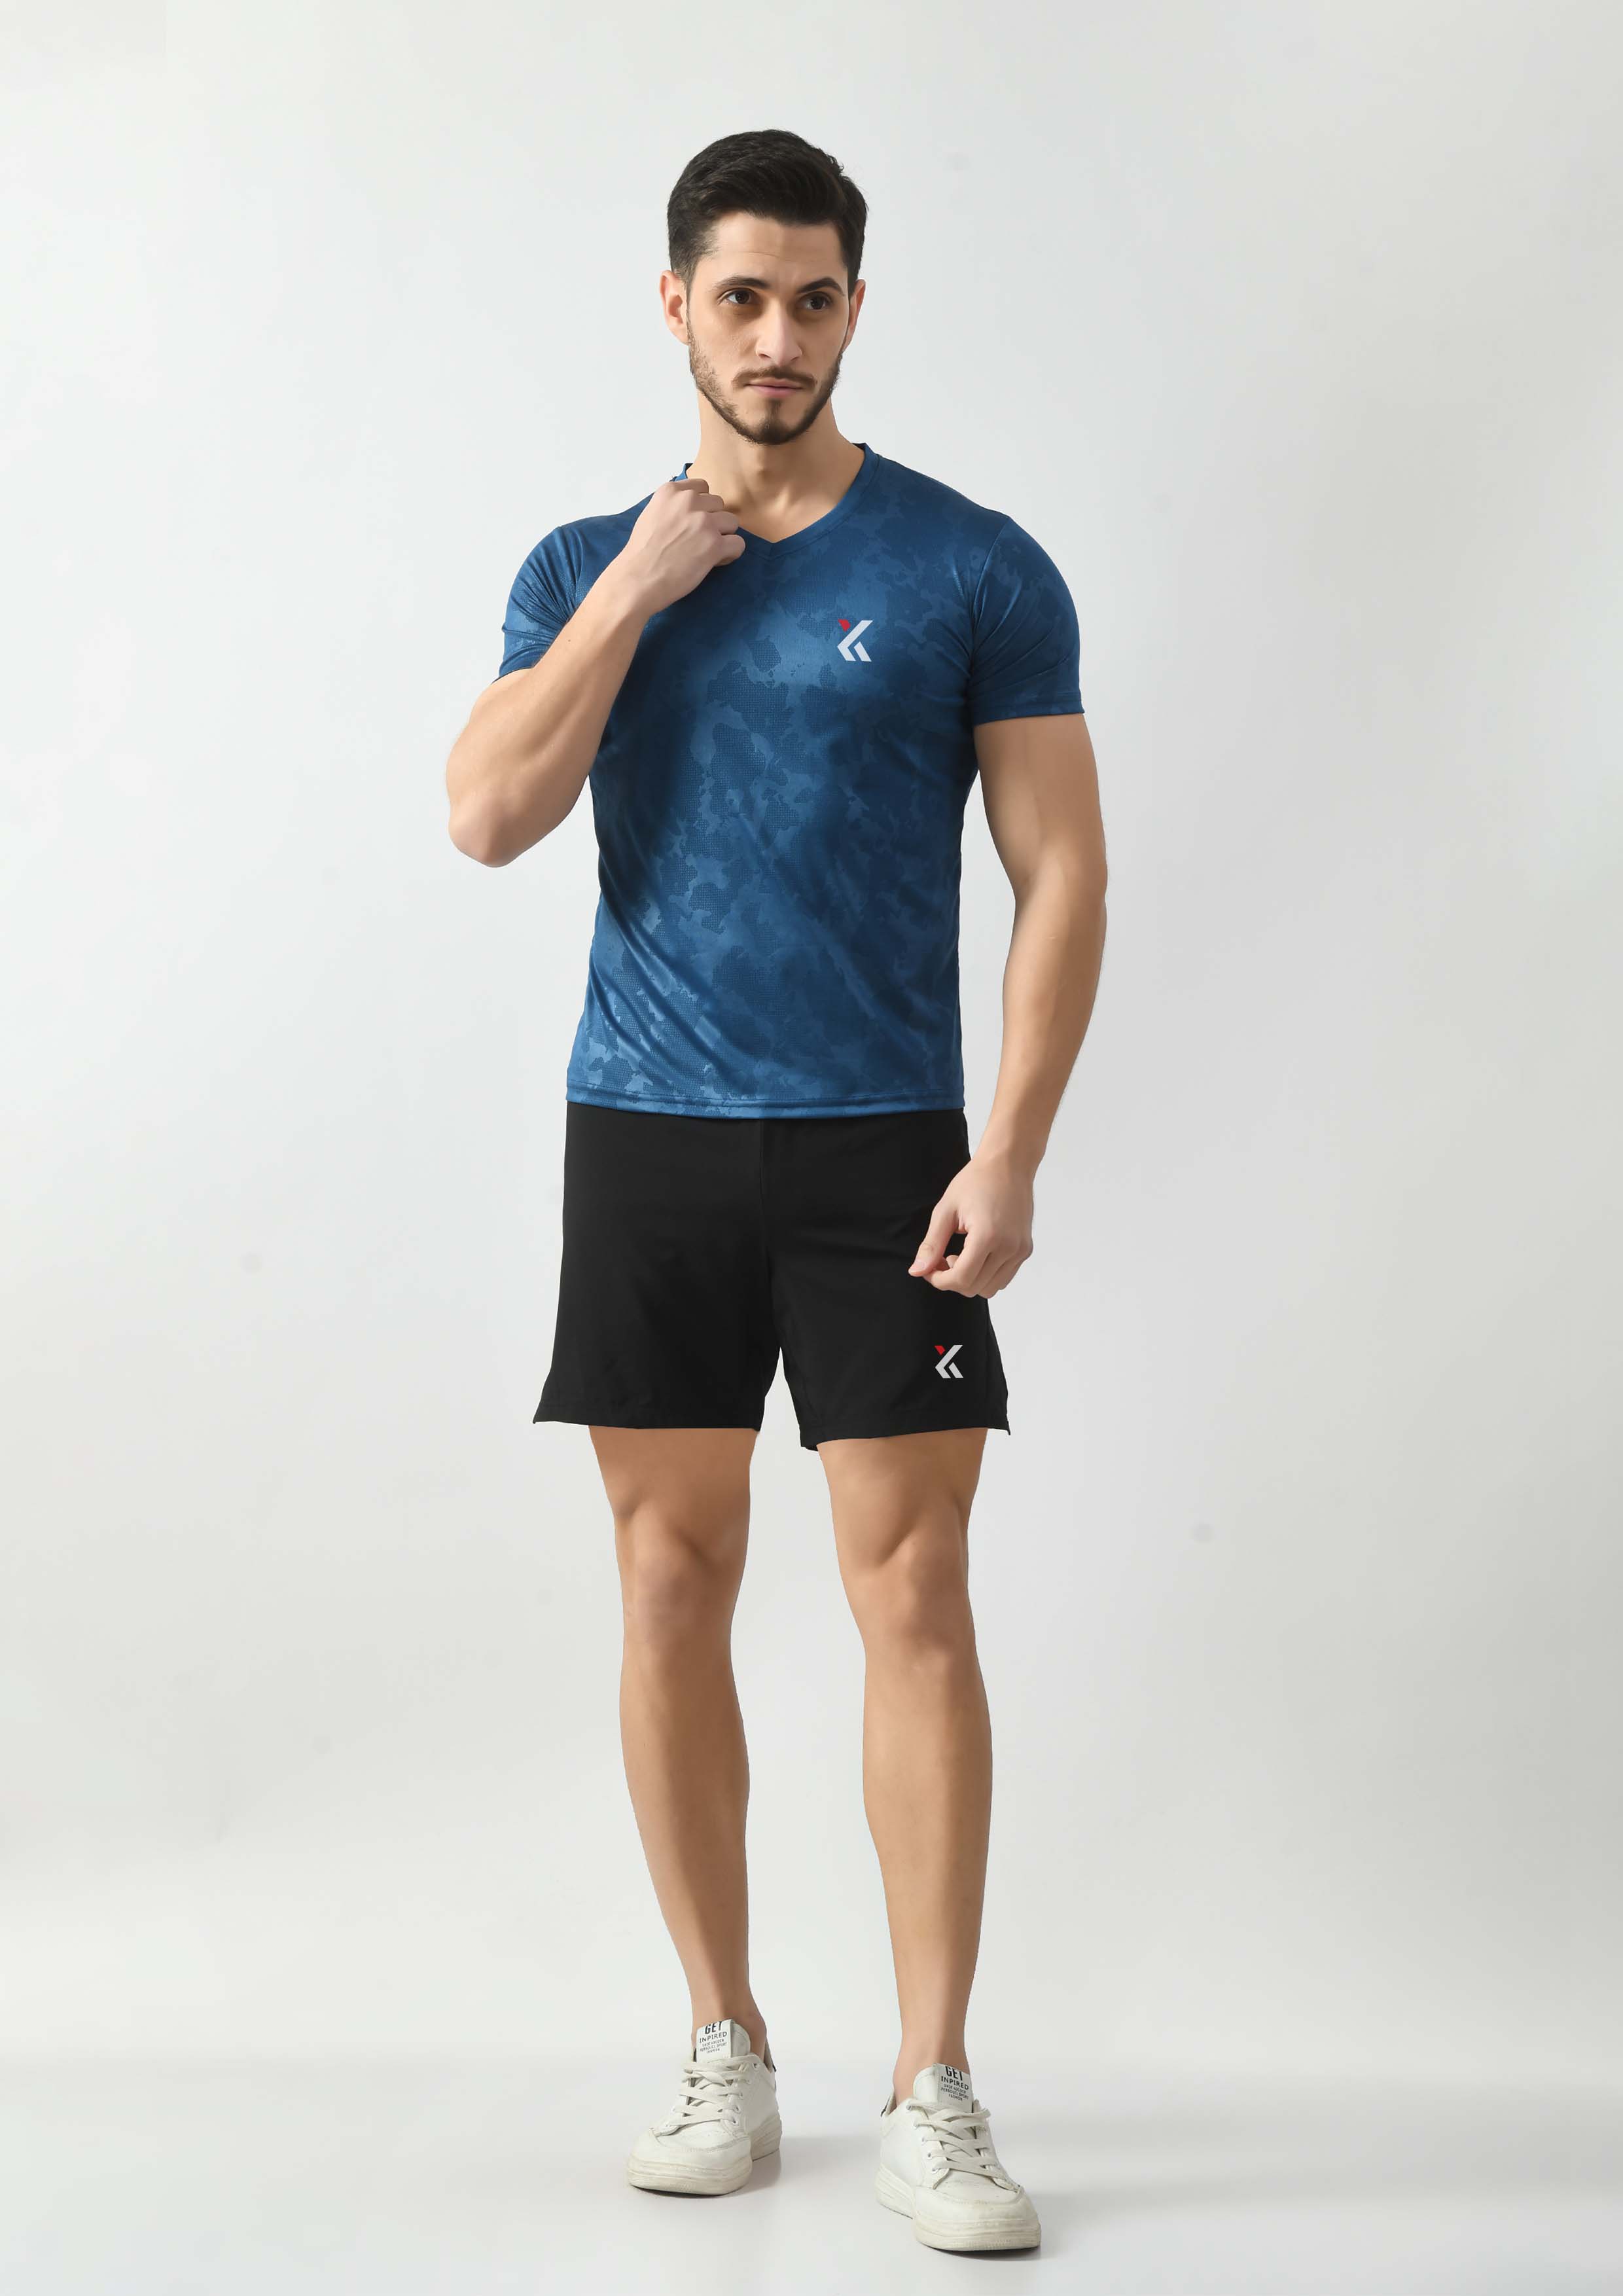 Teal gym t-shirt for mens